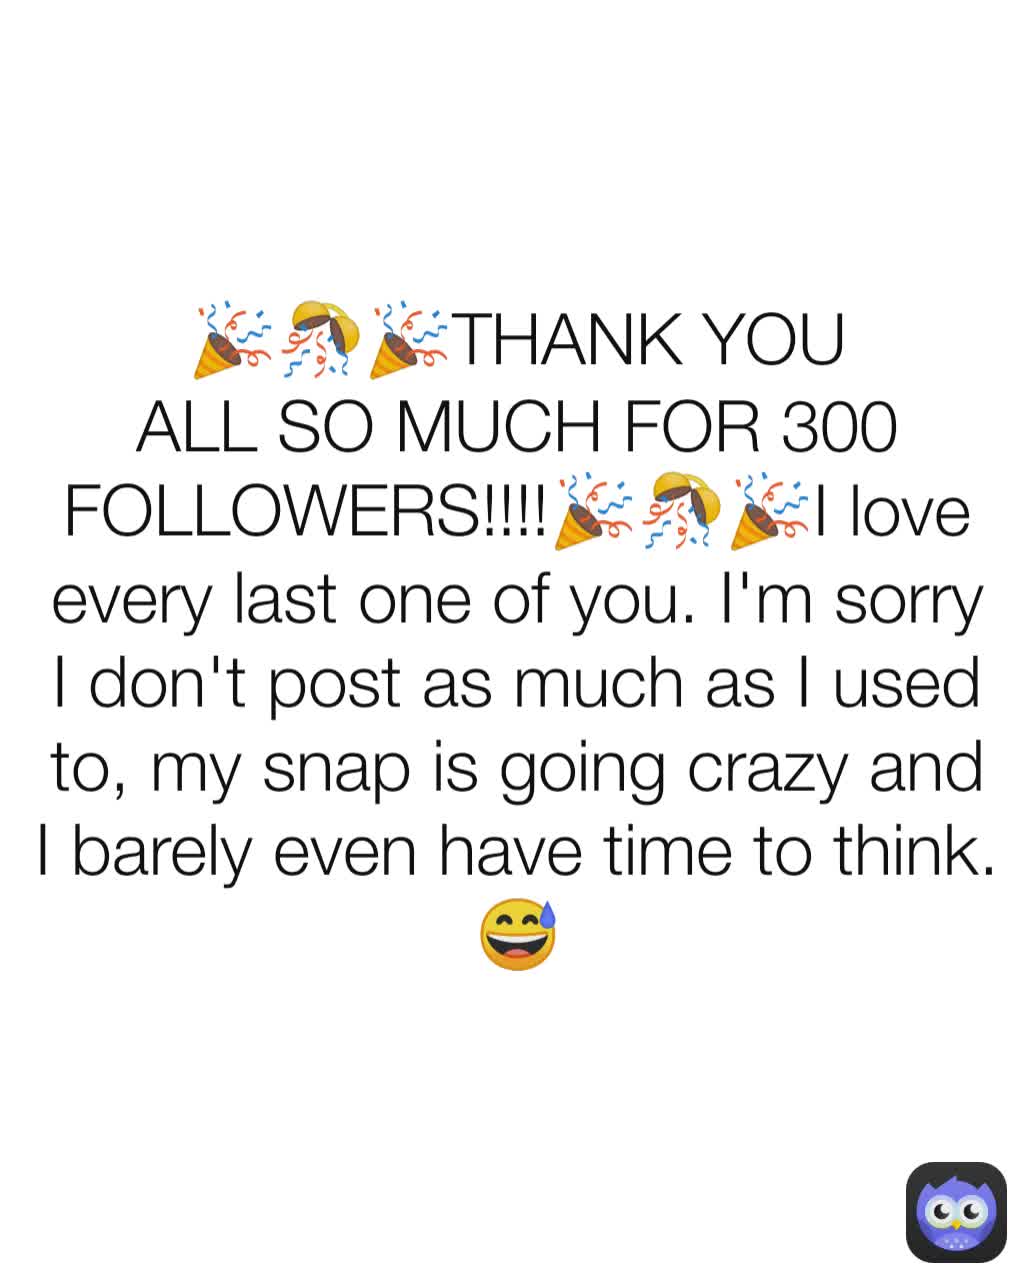 🎉🎊🎉THANK YOU ALL SO MUCH FOR 300 FOLLOWERS!!!!🎉🎊🎉I love every last one of you. I'm sorry I don't post as much as I used to, my snap is going crazy and I barely even have time to think.😅